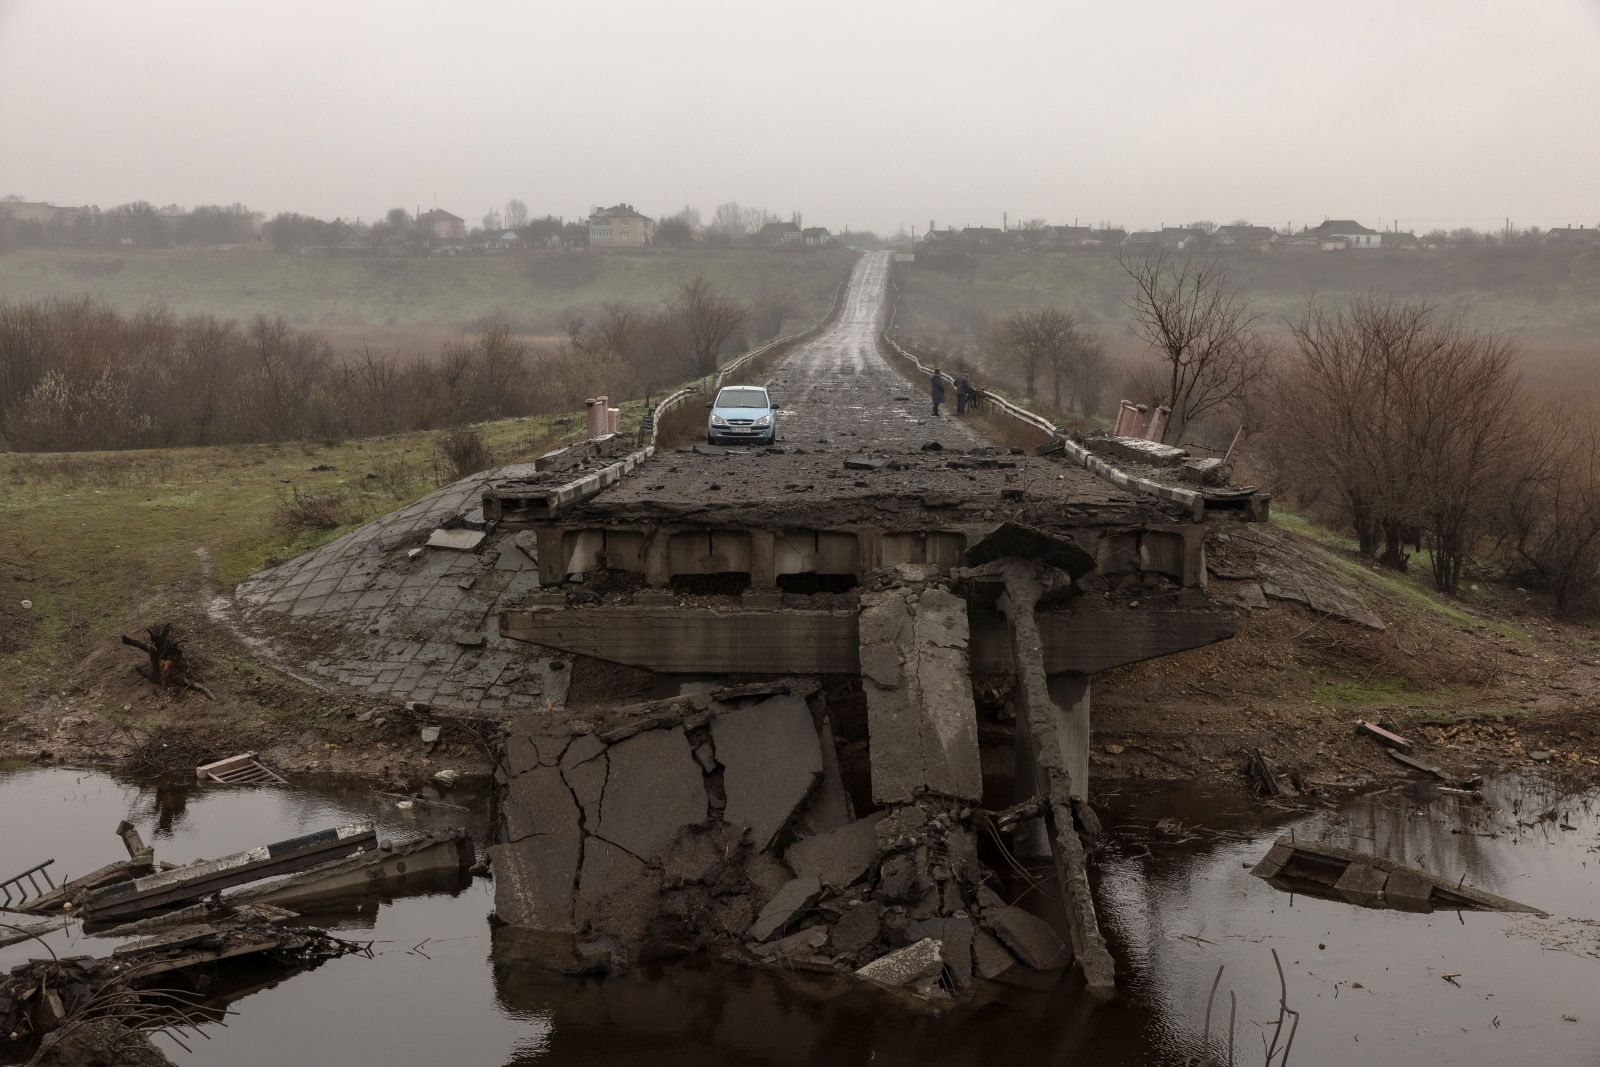 epa10331753 People (R, back) stand near a car on a destroyed bridge outside Kherson, southern Ukraine, 26 November 2022 (issued 27 November 2022). The Ukrainian president accused the Russian army of deliberately destroying critical infrastructure during their withdrawal from the city of Kherson, including electricity and water supplies. Ukrainian troops entered Kherson on 11 November after the Russian army had withdrawn from the city which they captured in the early stage of the conflict, shortly after Russian troops had entered Ukraine in February 2022.  EPA/ROMAN PILIPEY